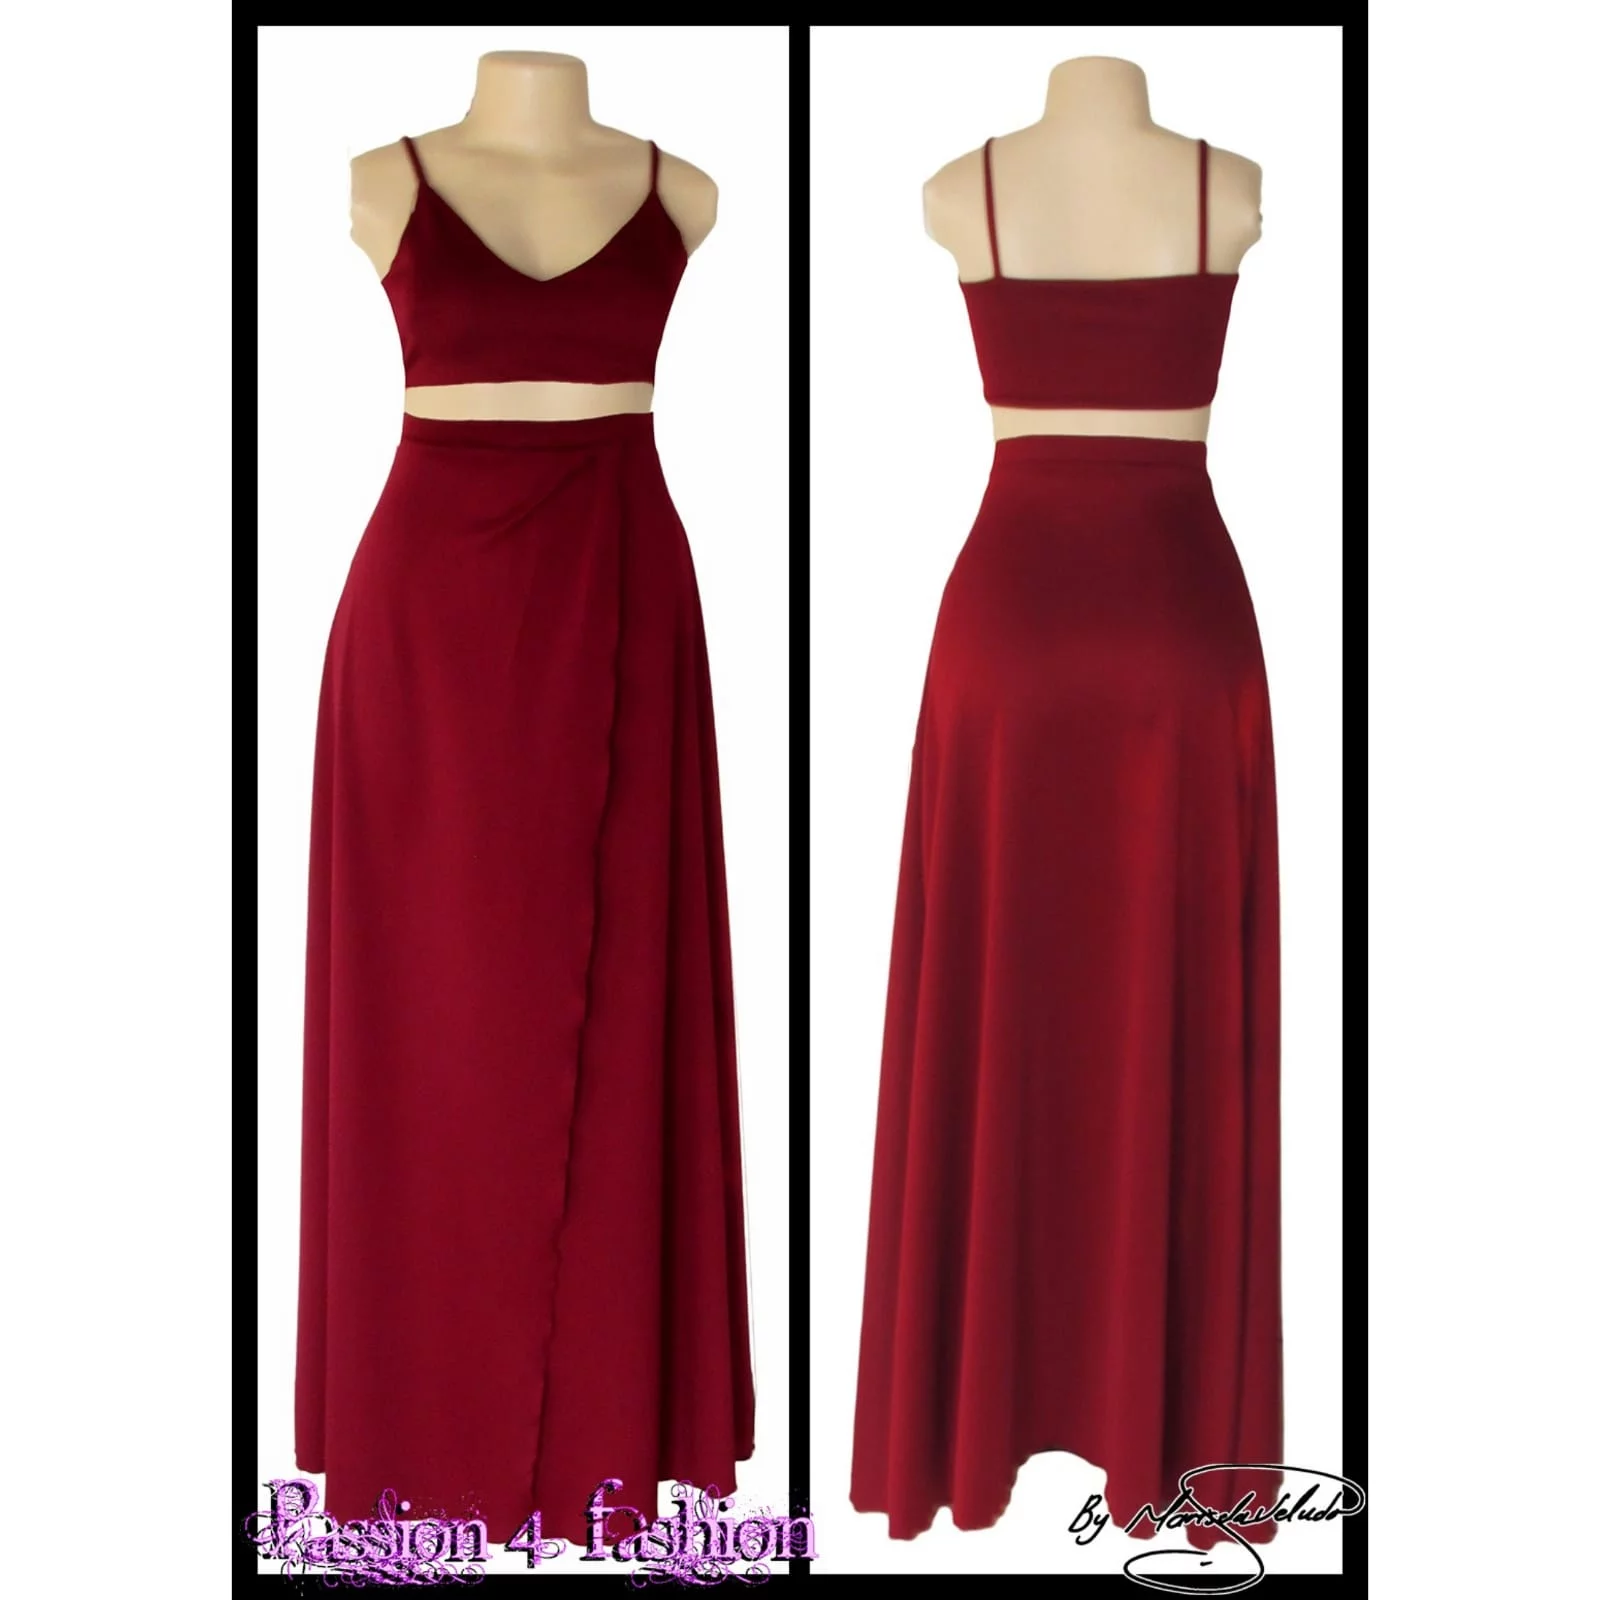 Maroon 2 piece smart casual wear 2 maroon 2 piece smart casual wear with a crop top and a long skirt with a crossed slit.